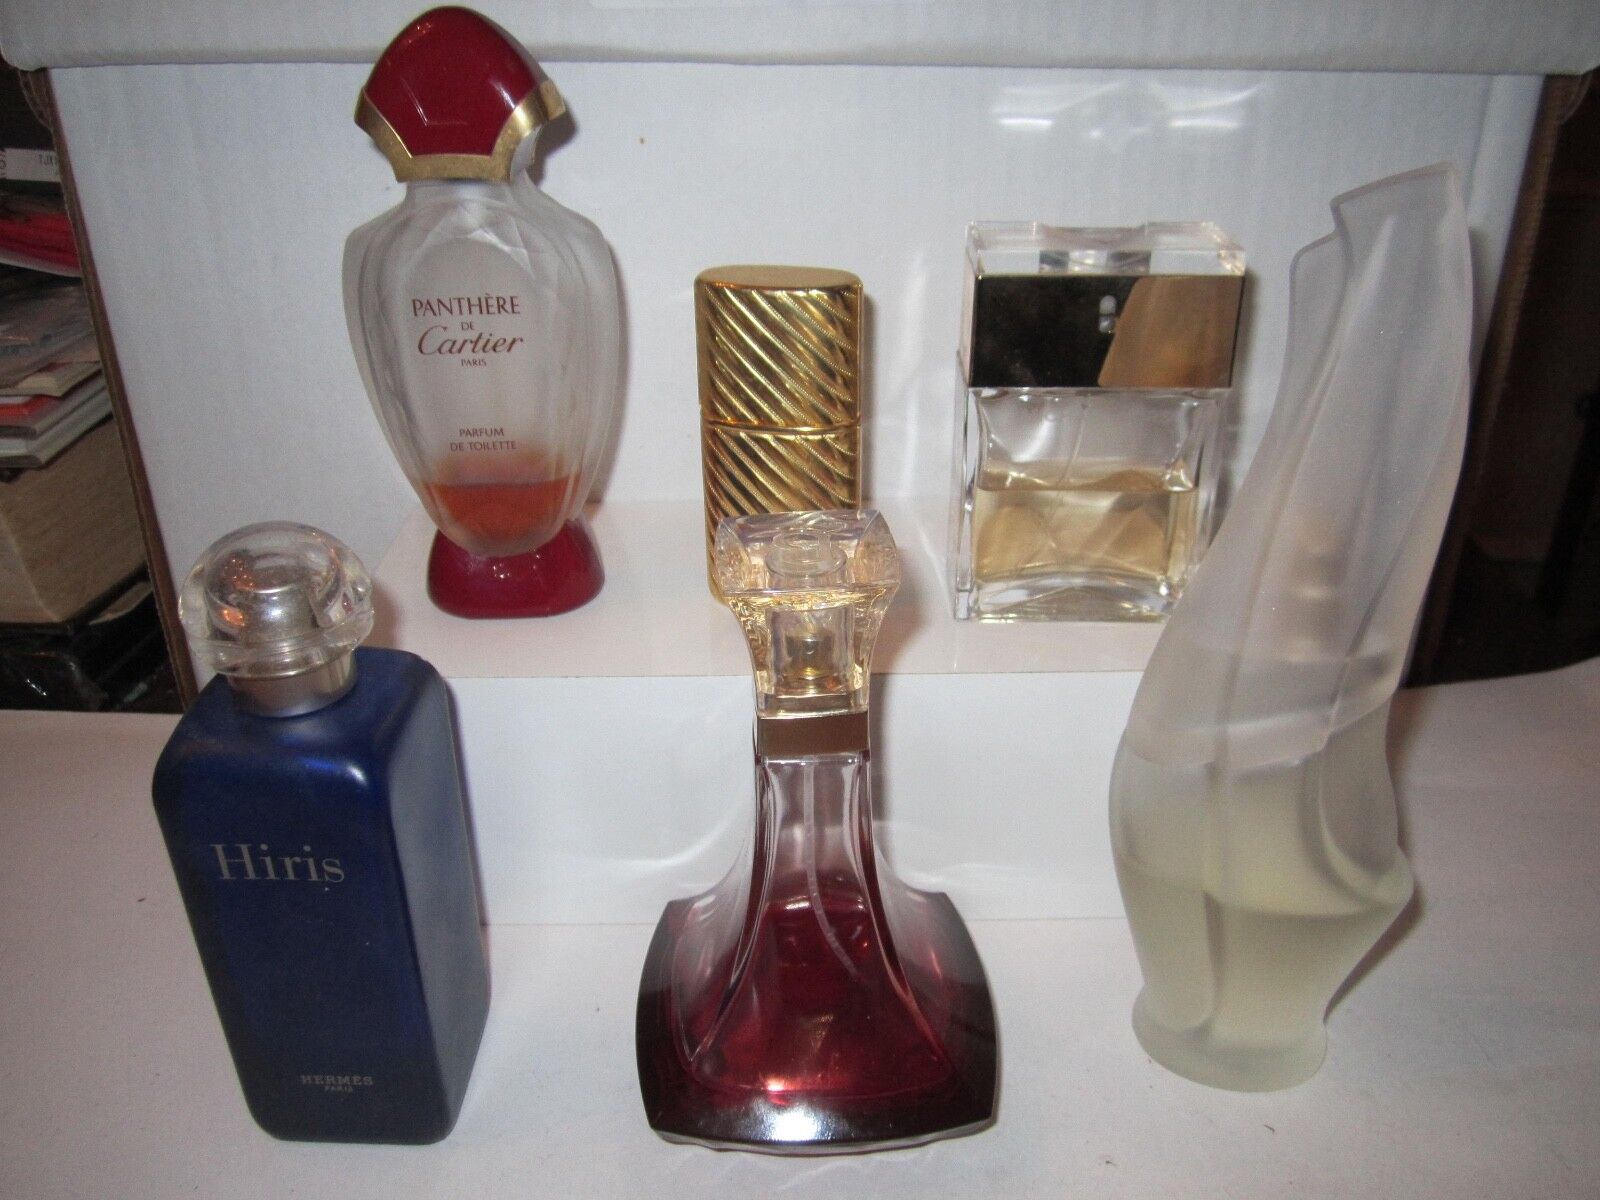 LOT OF FRENCH PERFUMES & MORE - HERMES, CARTIER & MORE - SEE LIST BELOW